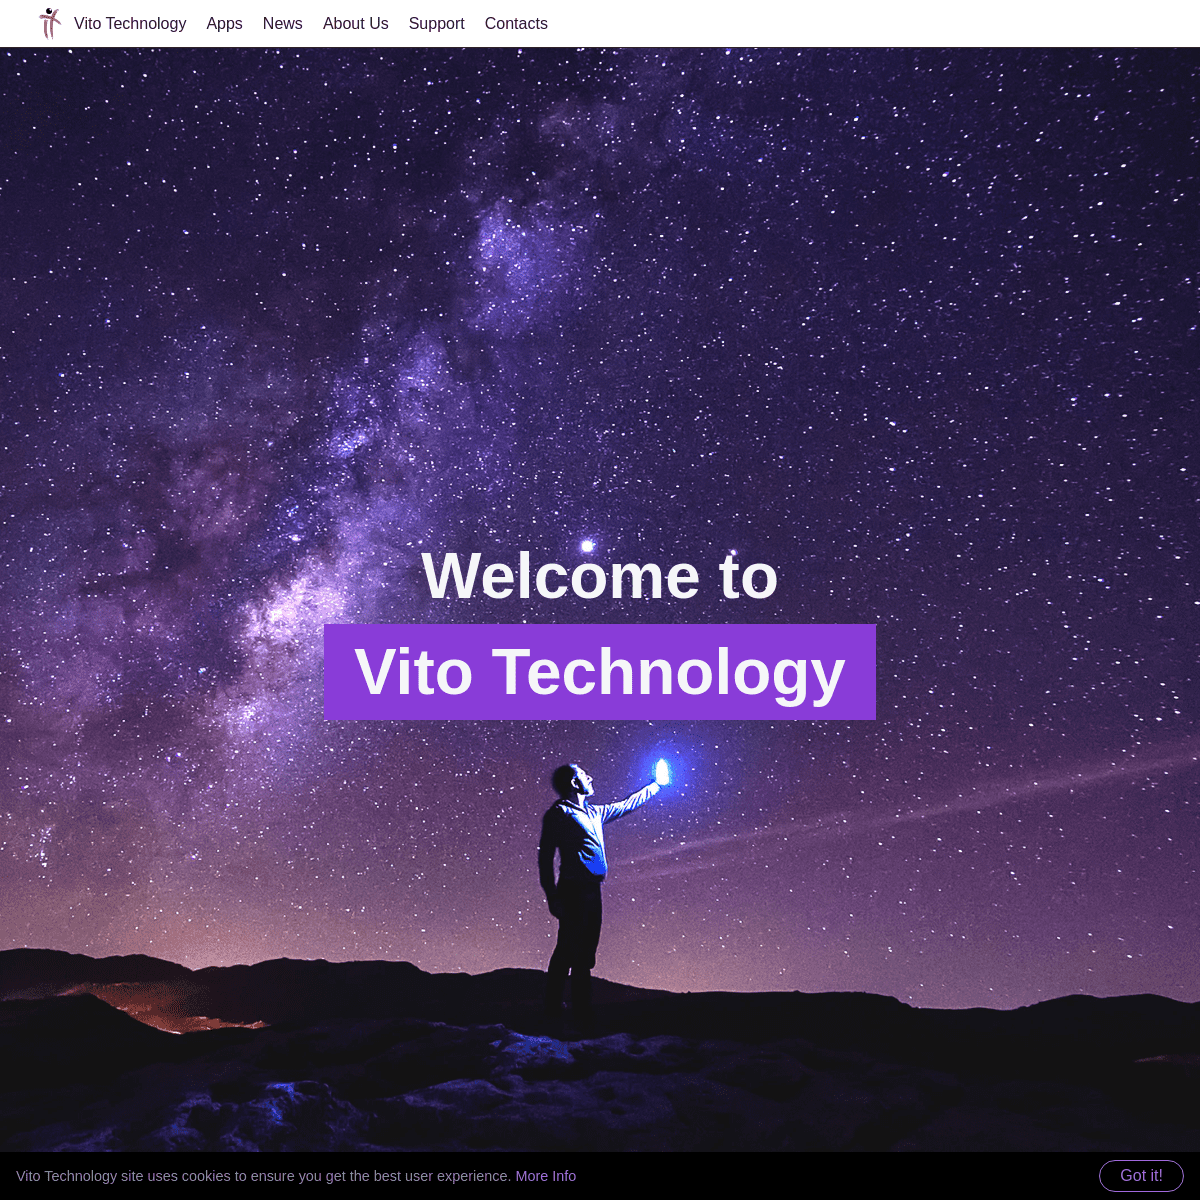 A complete backup of https://vitotechnology.com